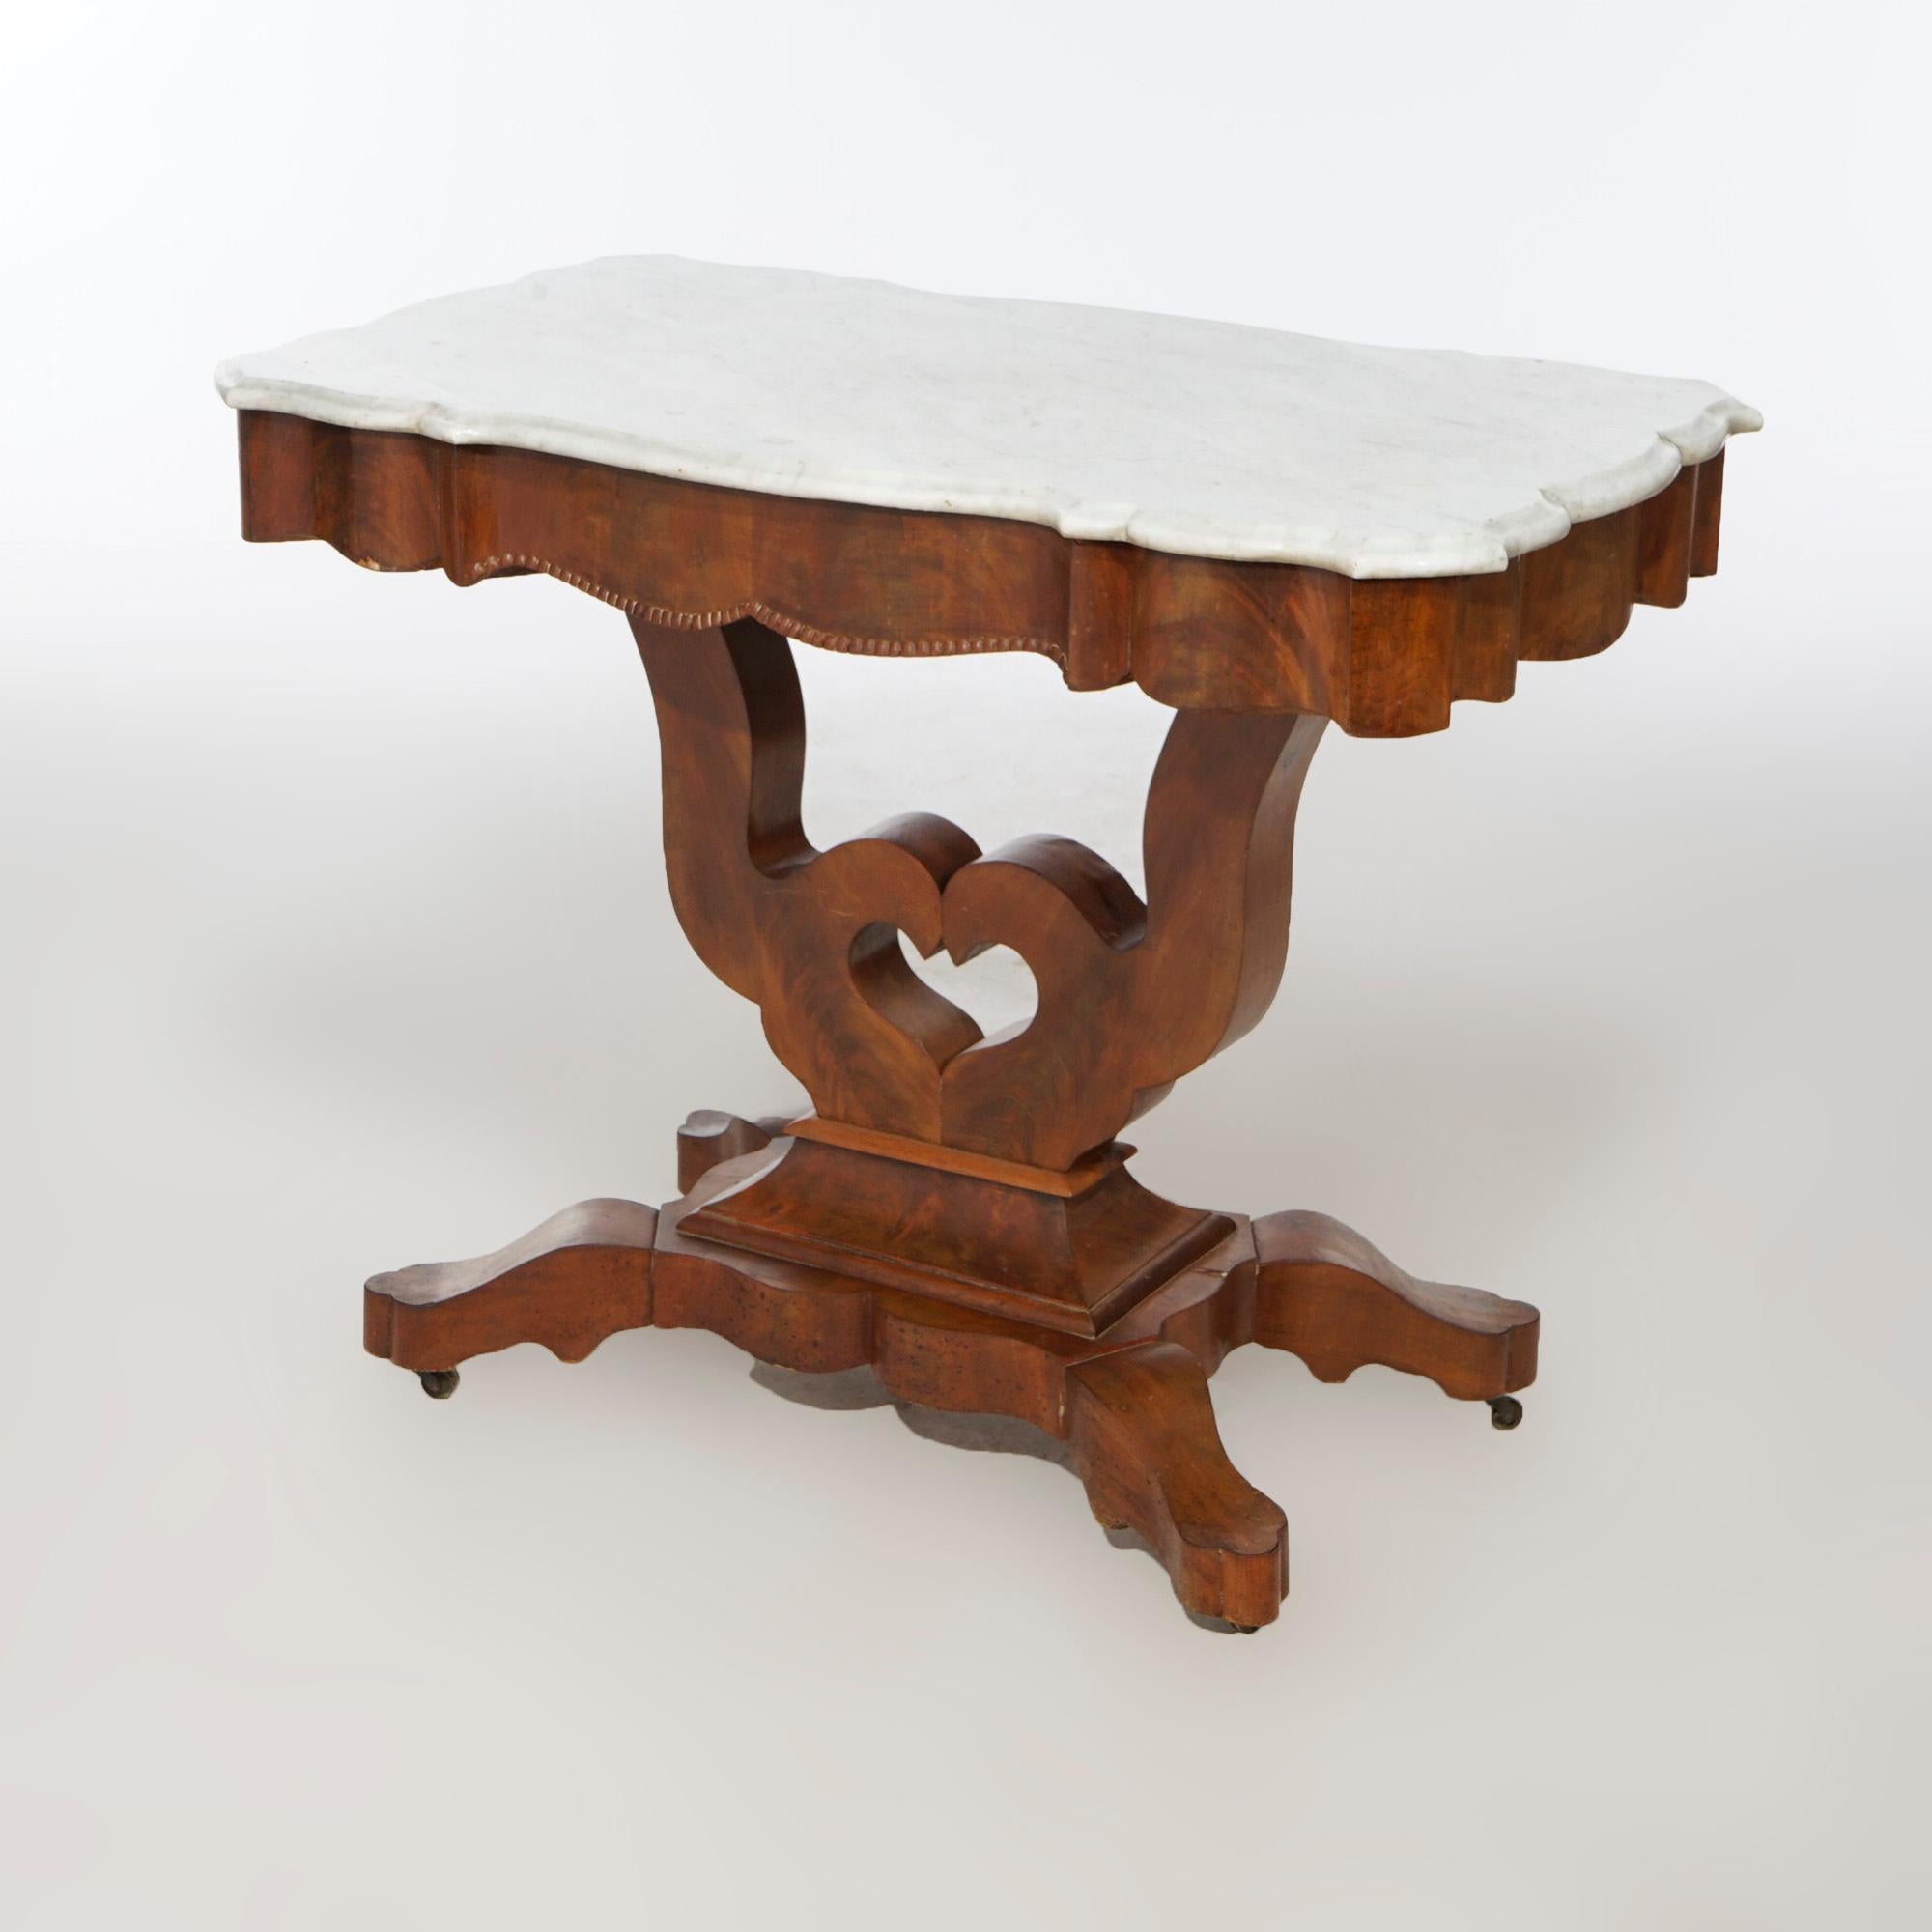 American Antique Neoclassical Flame Mahogany & Marble Lyre Turtle Top Parlor Table c1880 For Sale